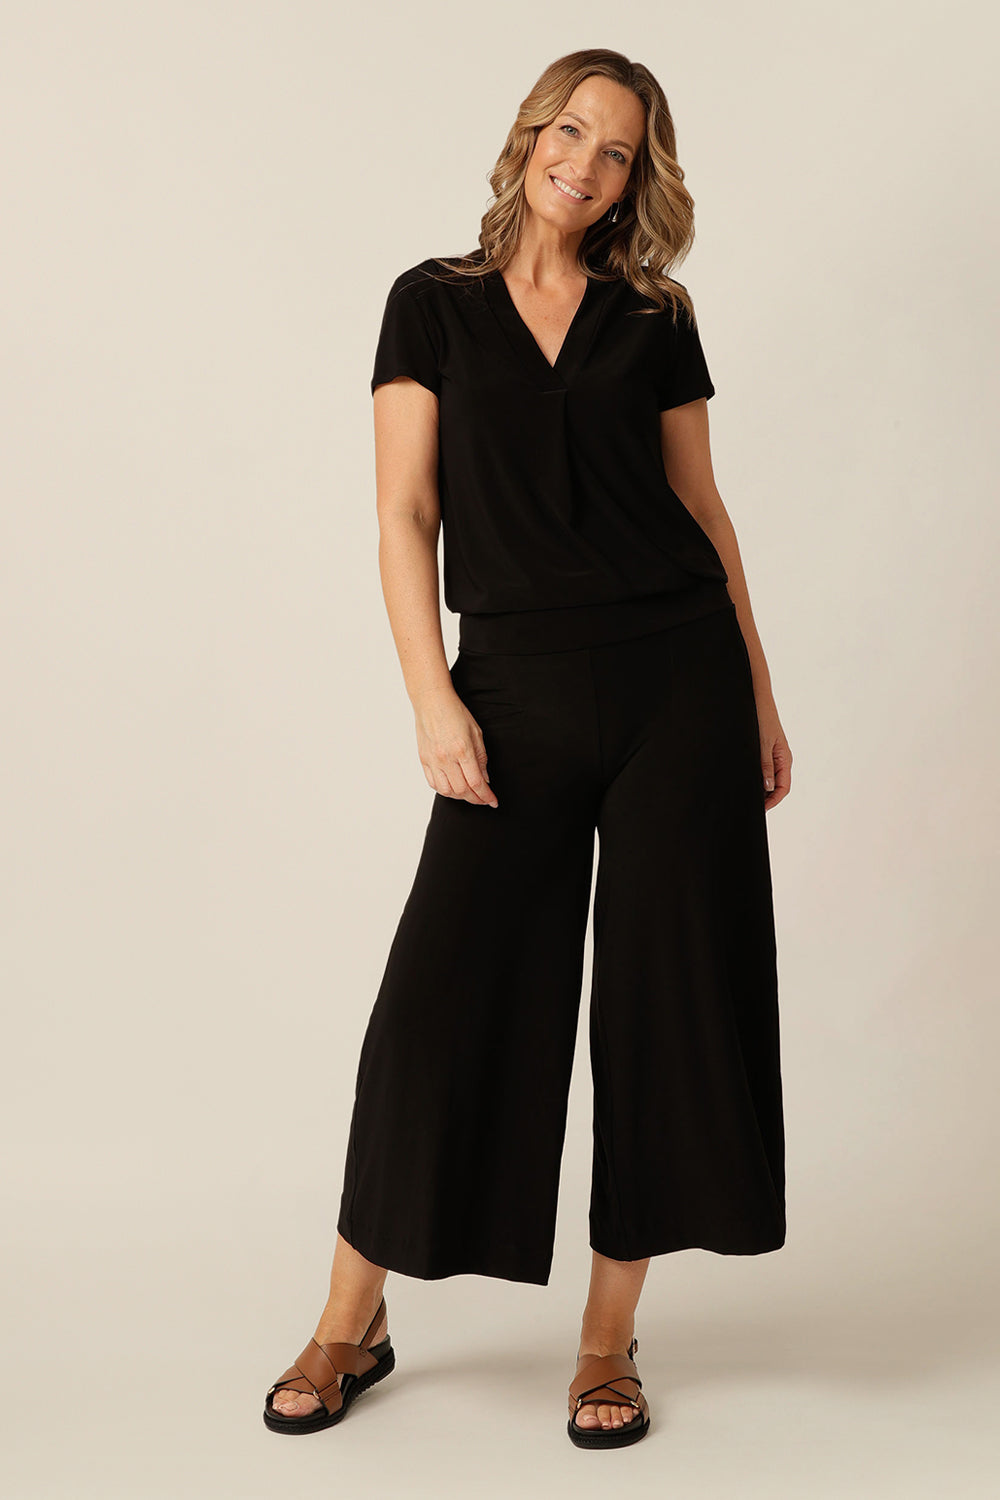 tailored jersey top with v-neckline and short sleeves - the Emily Top is a great top for relaxed corporate dressing. 